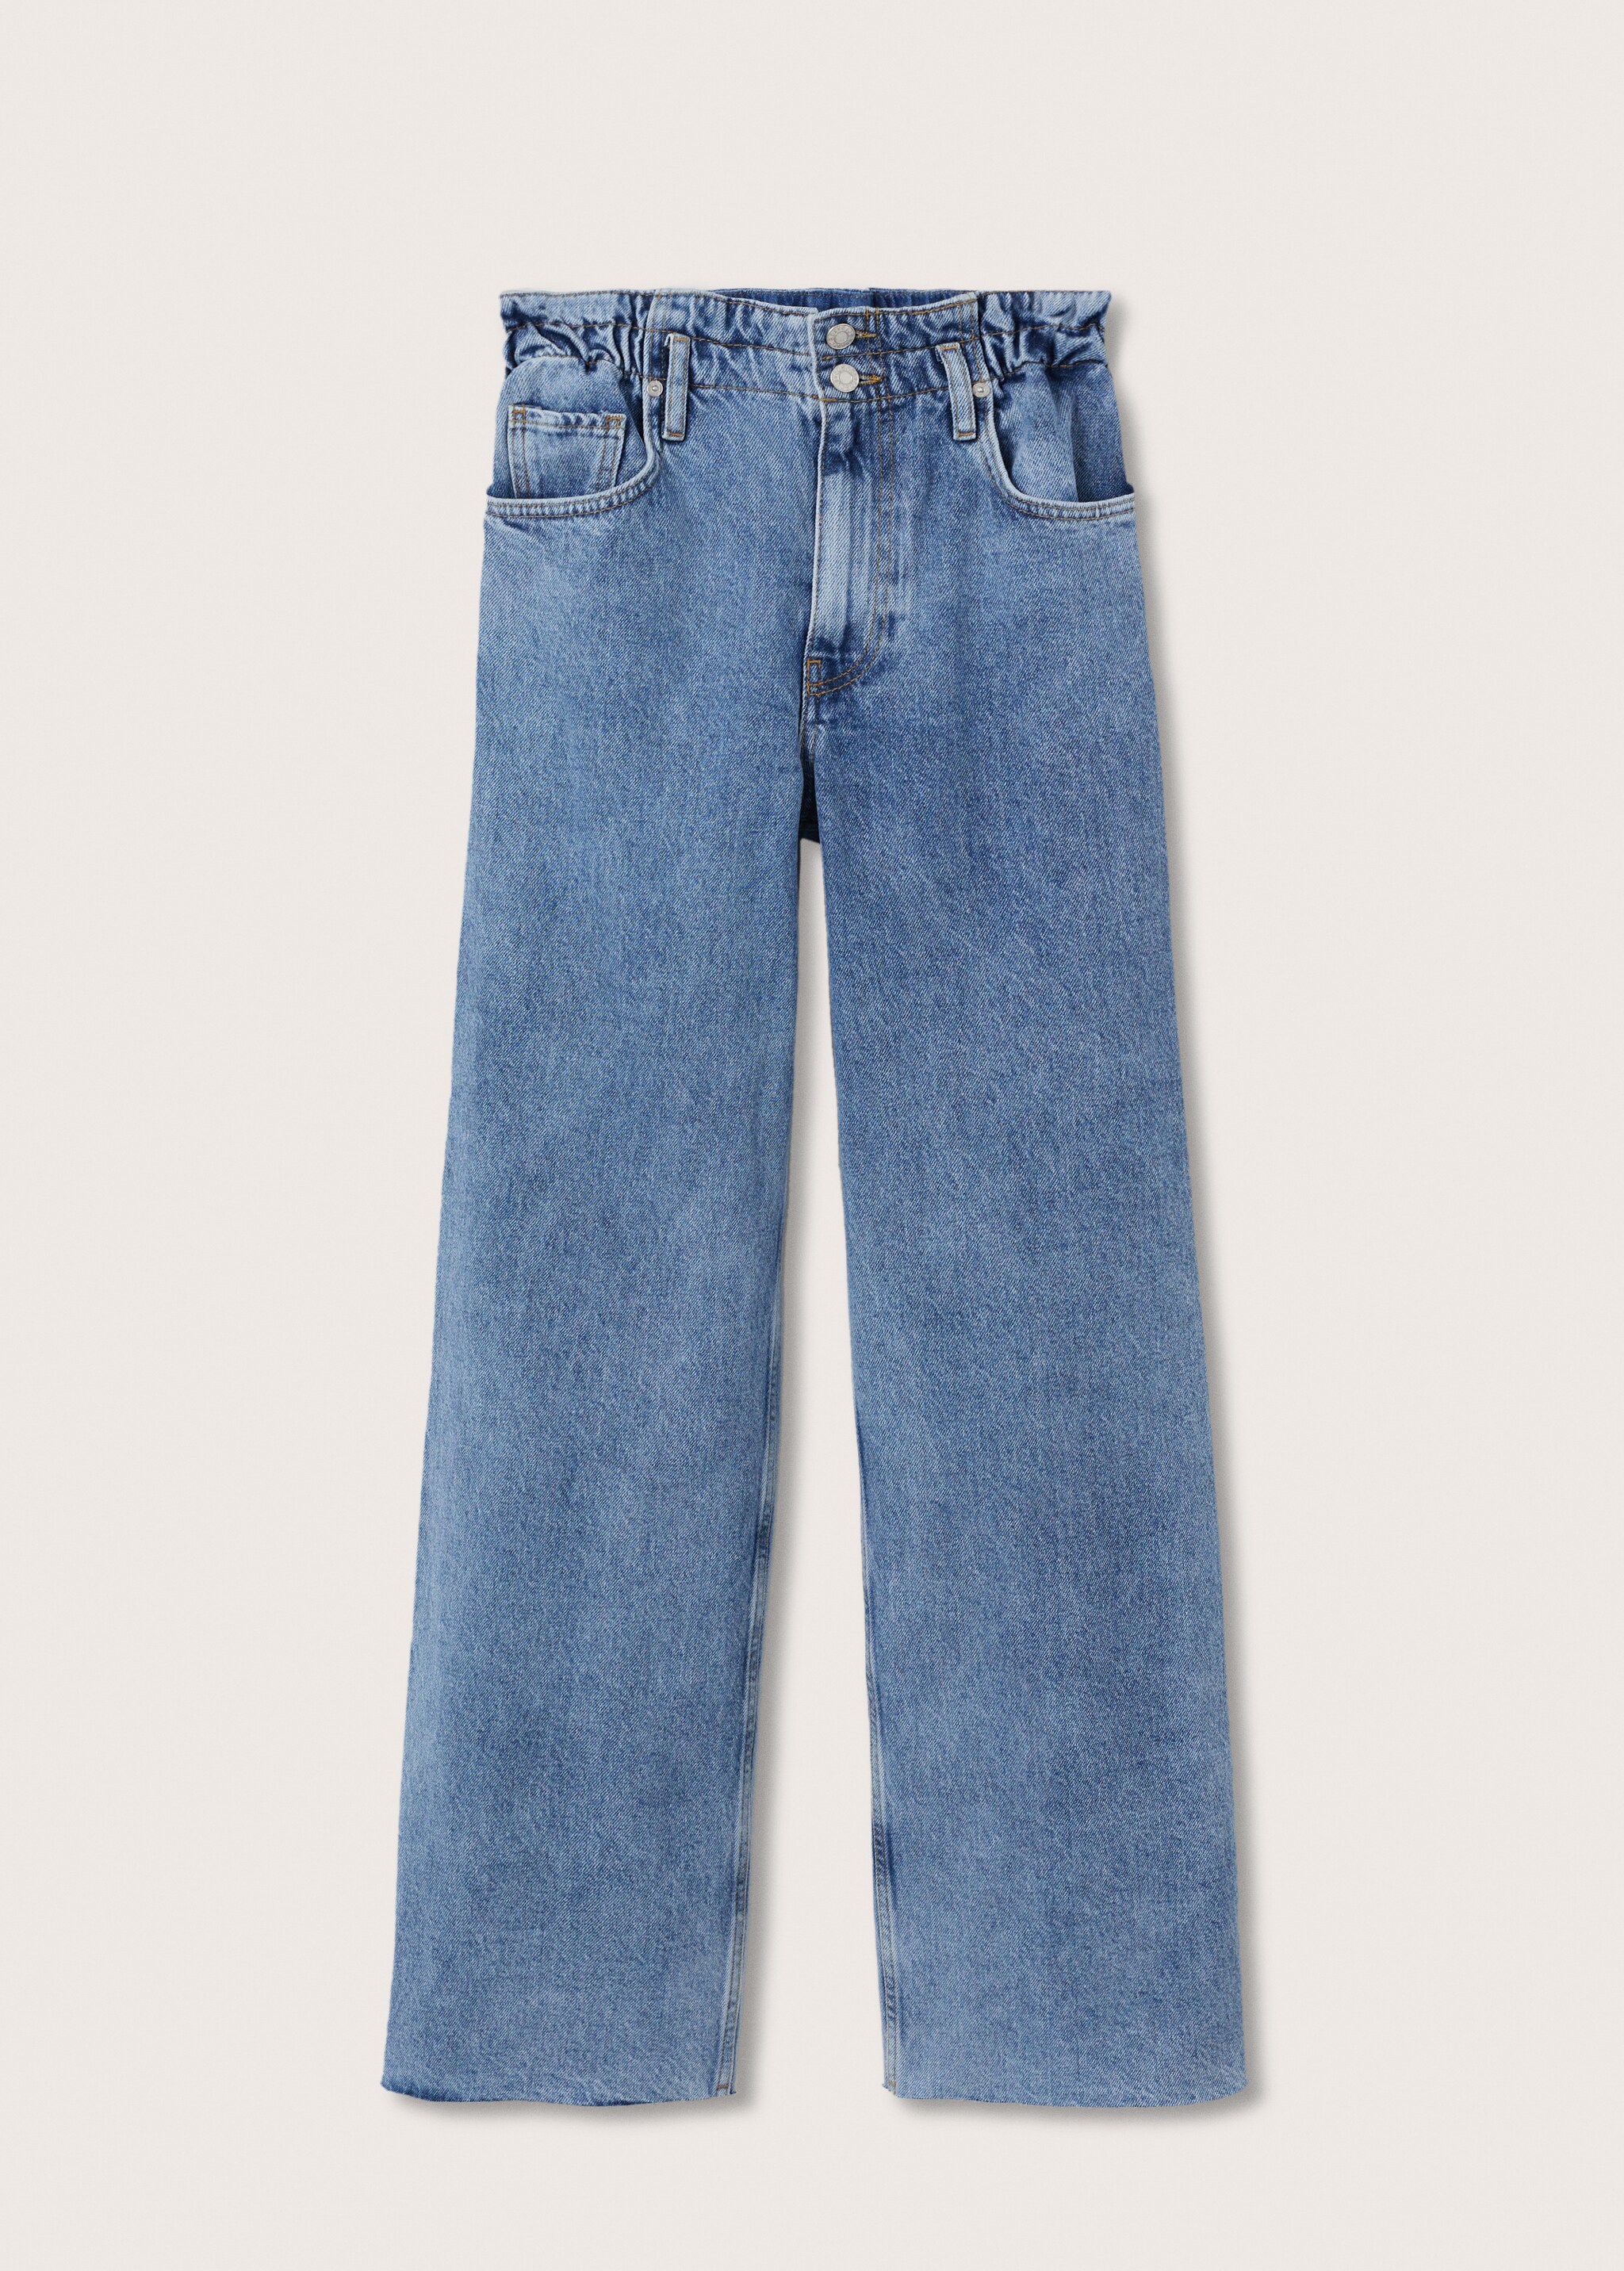 Wideleg elastic waist jeans - Article without model